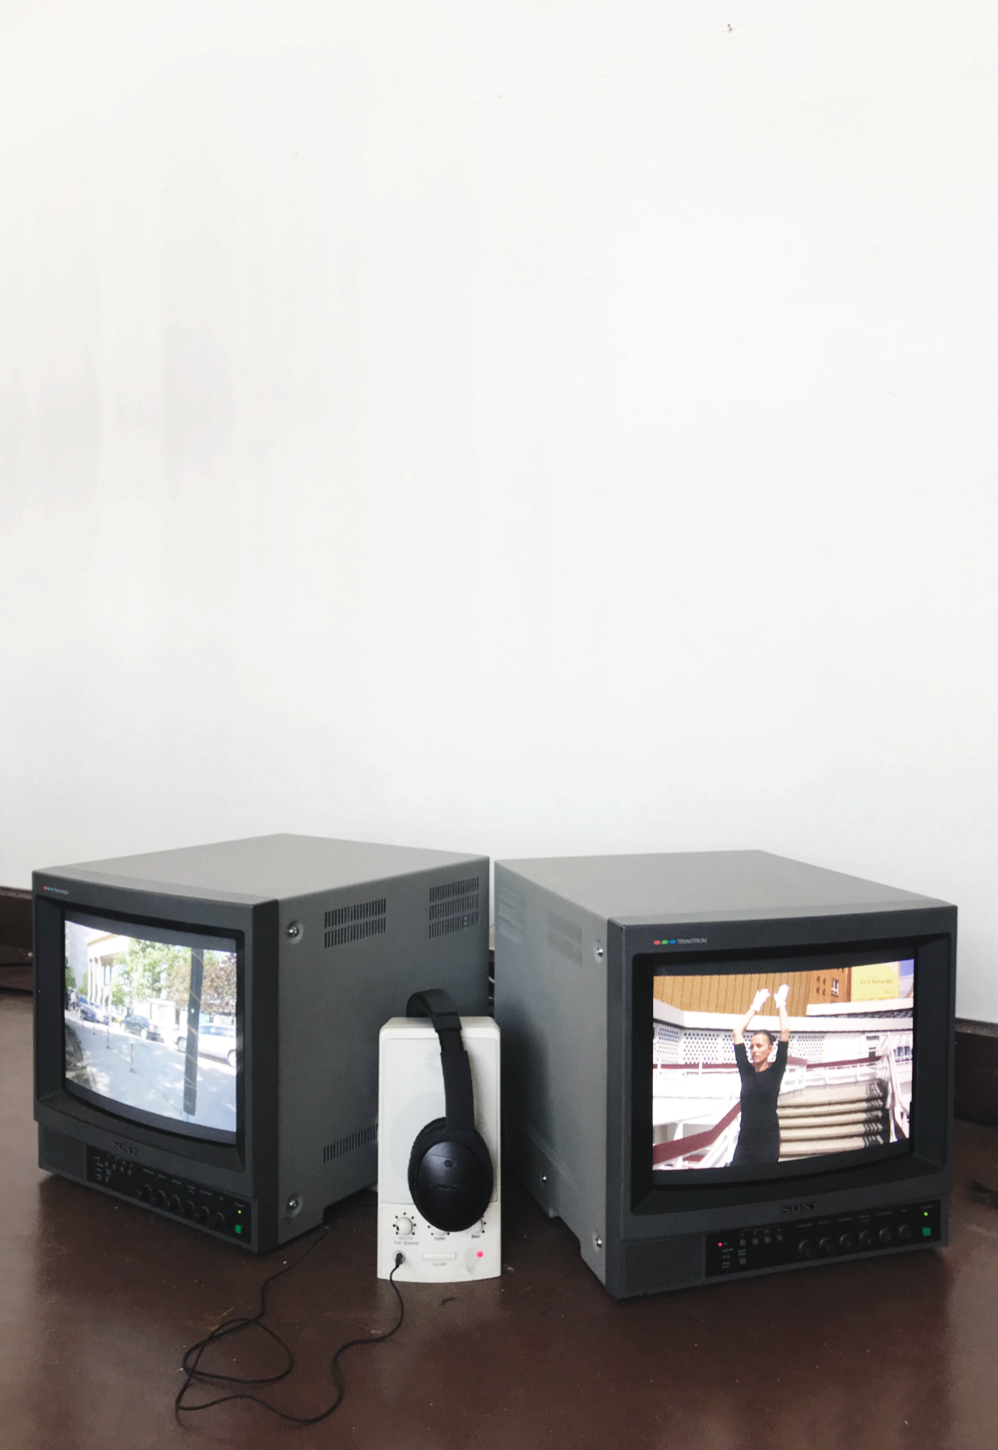 Two small TV monitors with a speaker and pair of headphones between them, showing different scenes from bo lin ai yue